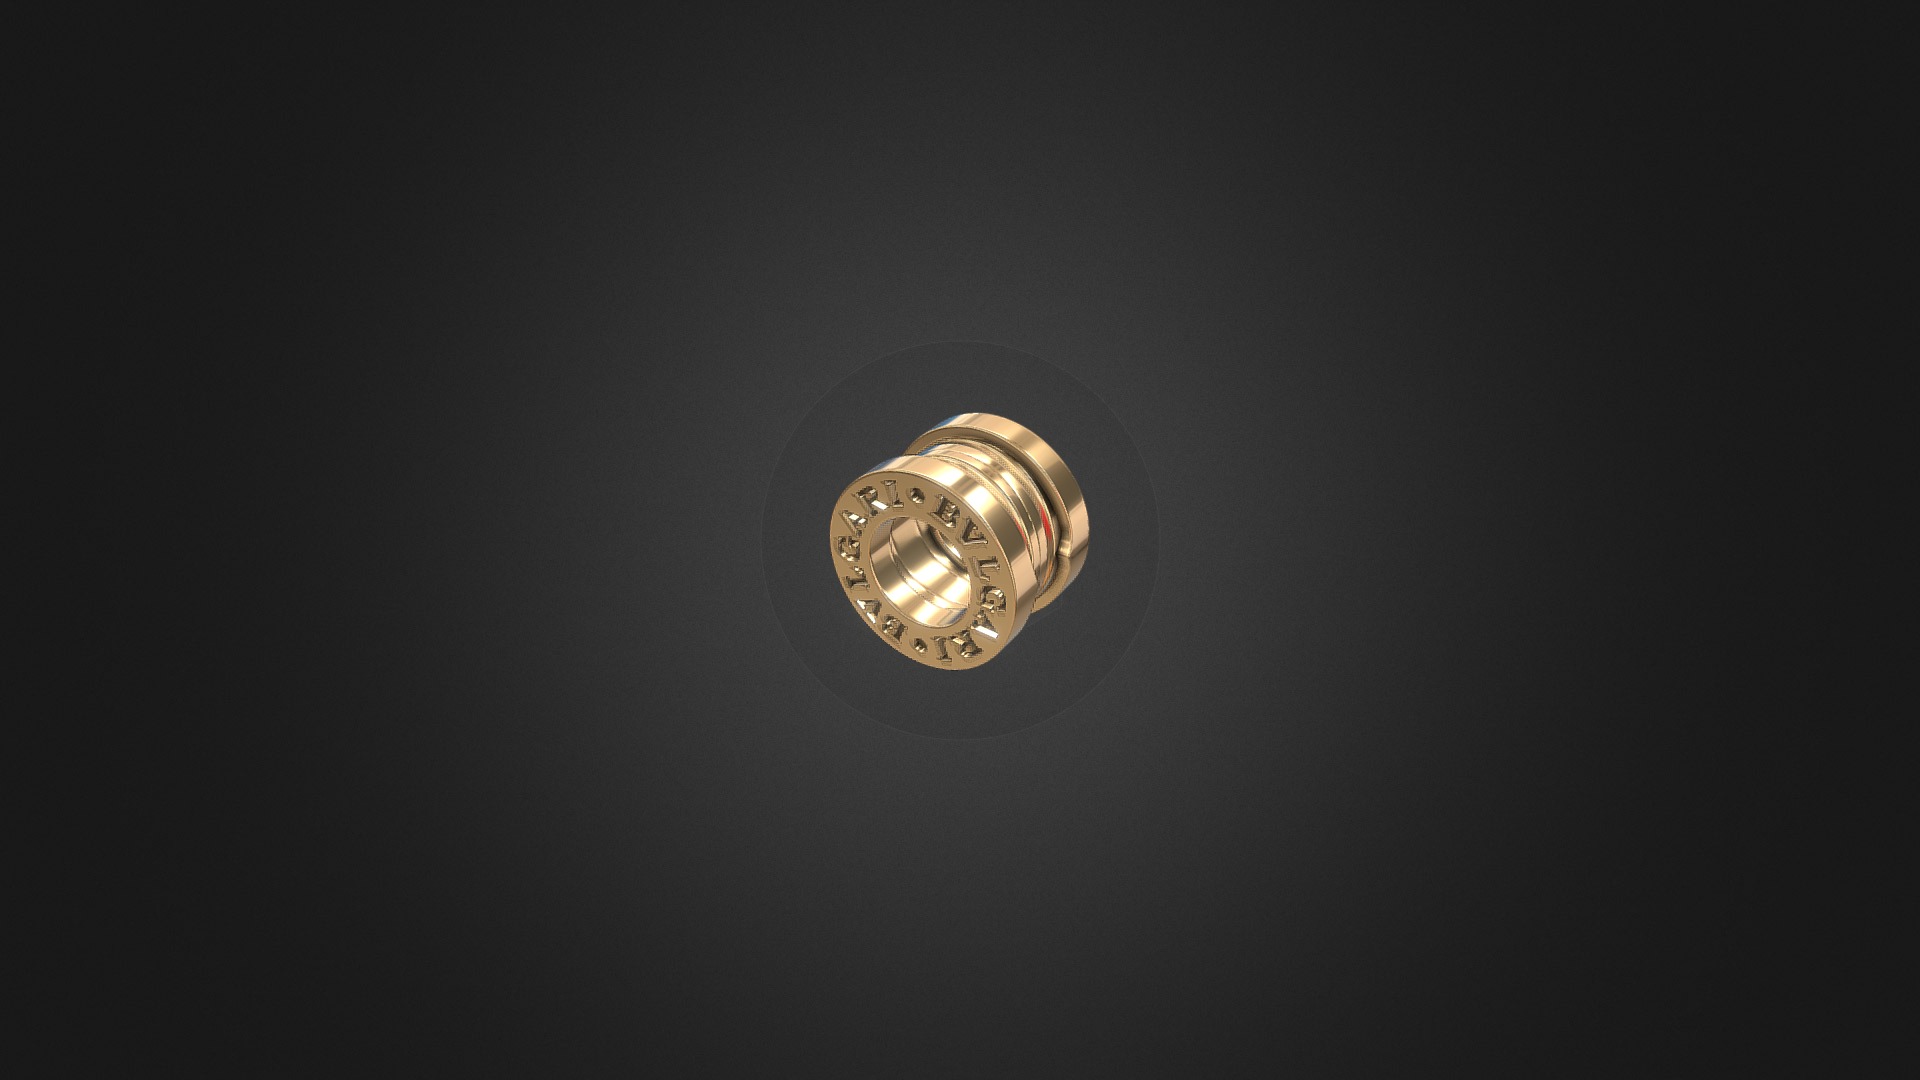 3D model 1081 – Earring - This is a 3D model of the 1081 - Earring. The 3D model is about a circular object with a light on it.